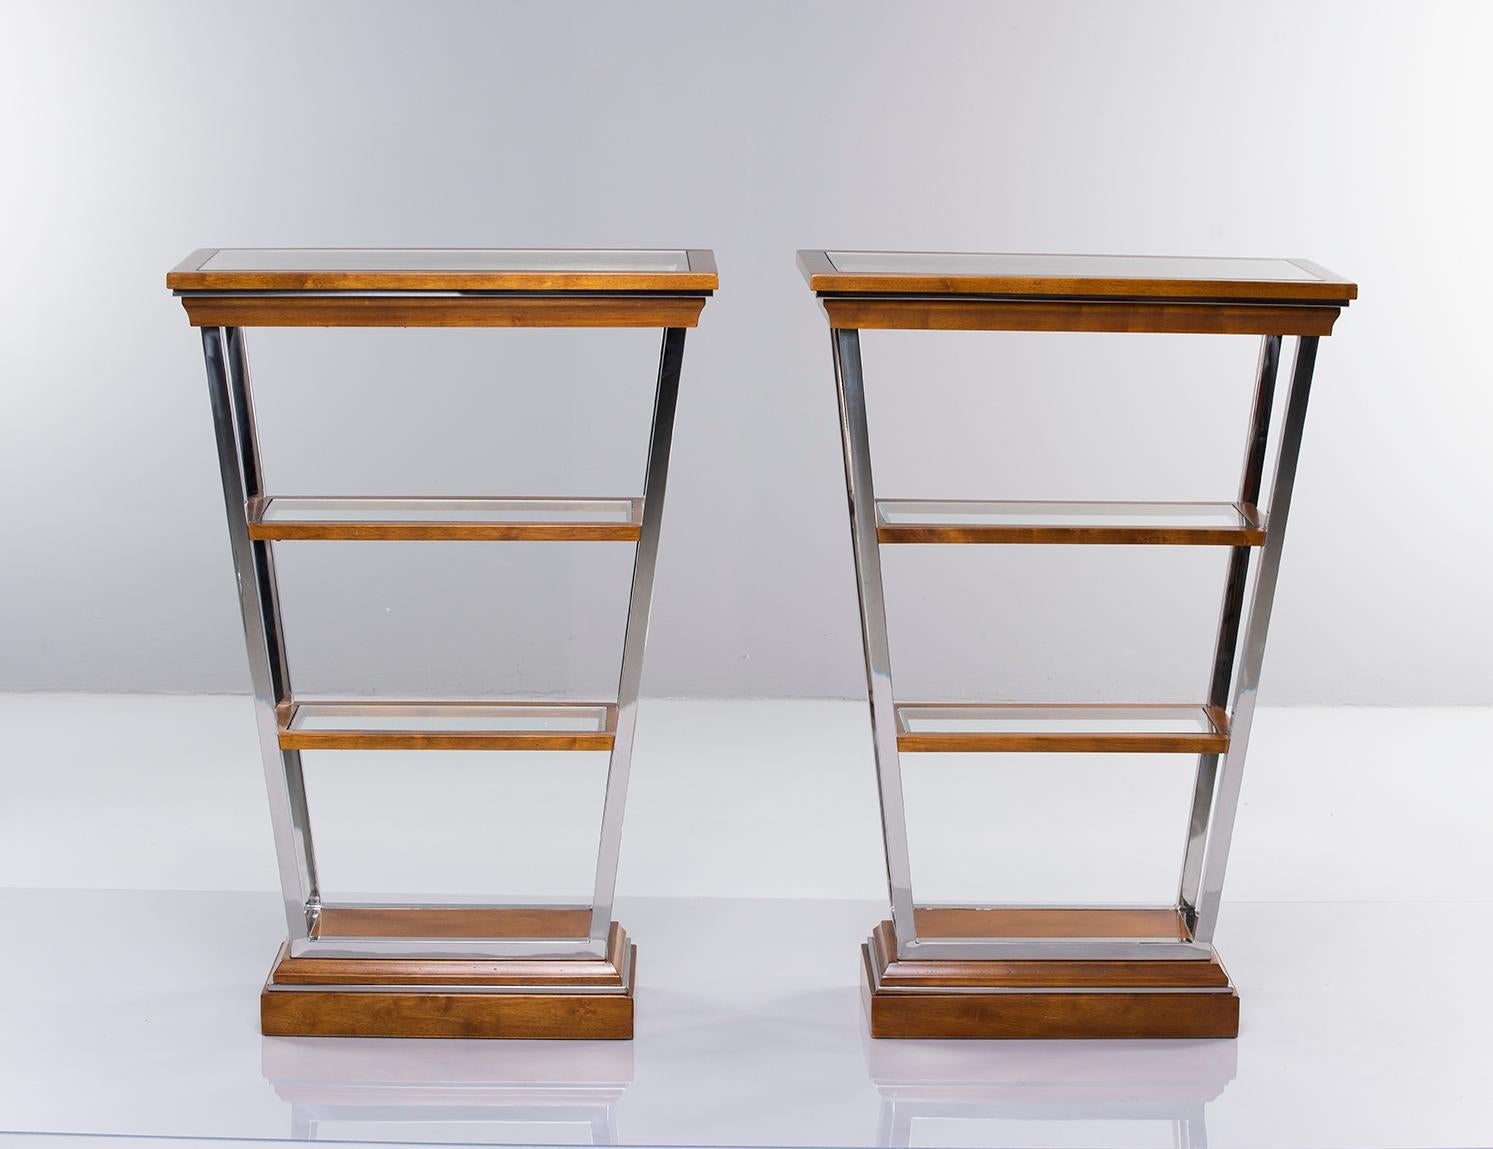 Pair of Brazilian four shelf étagères in V-Form with chrome trim, glass insert shelves and teak frames. Unknown maker. Very good vintage condition. Sold and priced as a pair, circa 1960s.